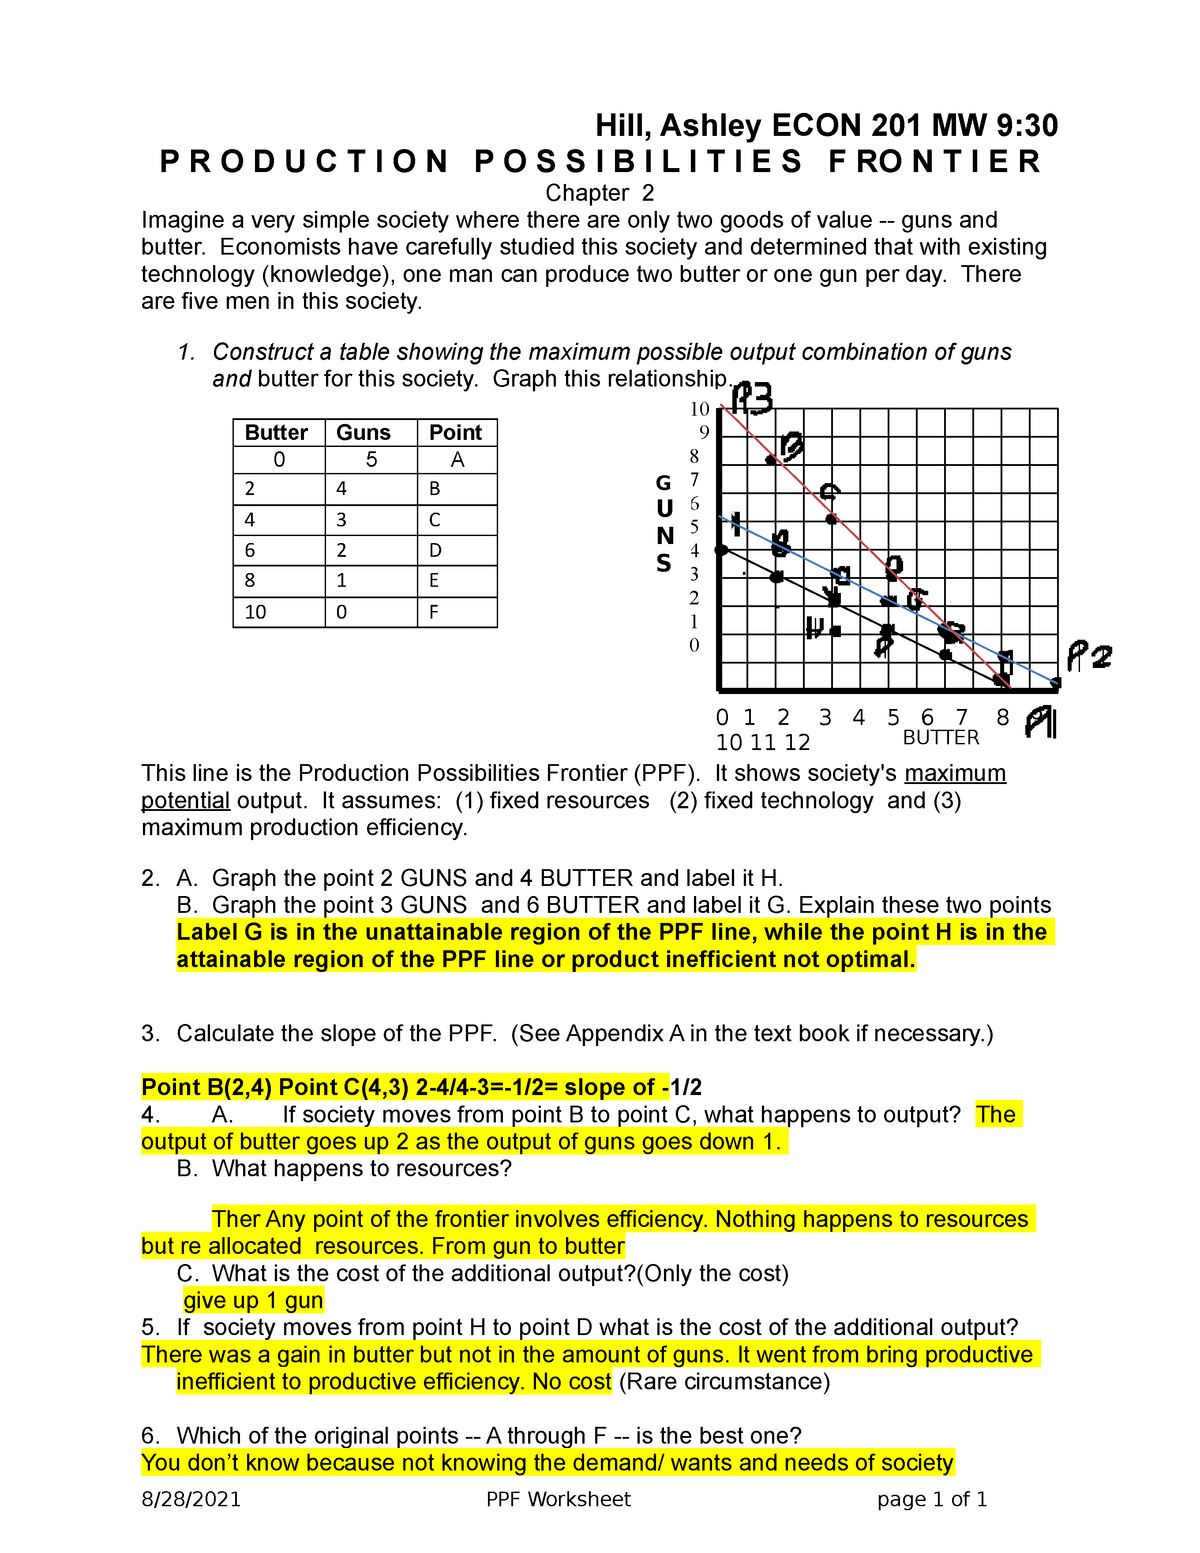 Chapter 20 PPF Worksheet - Hill, Ashley ECON 2001 MW 20 Regarding Production Possibilities Frontier Worksheet